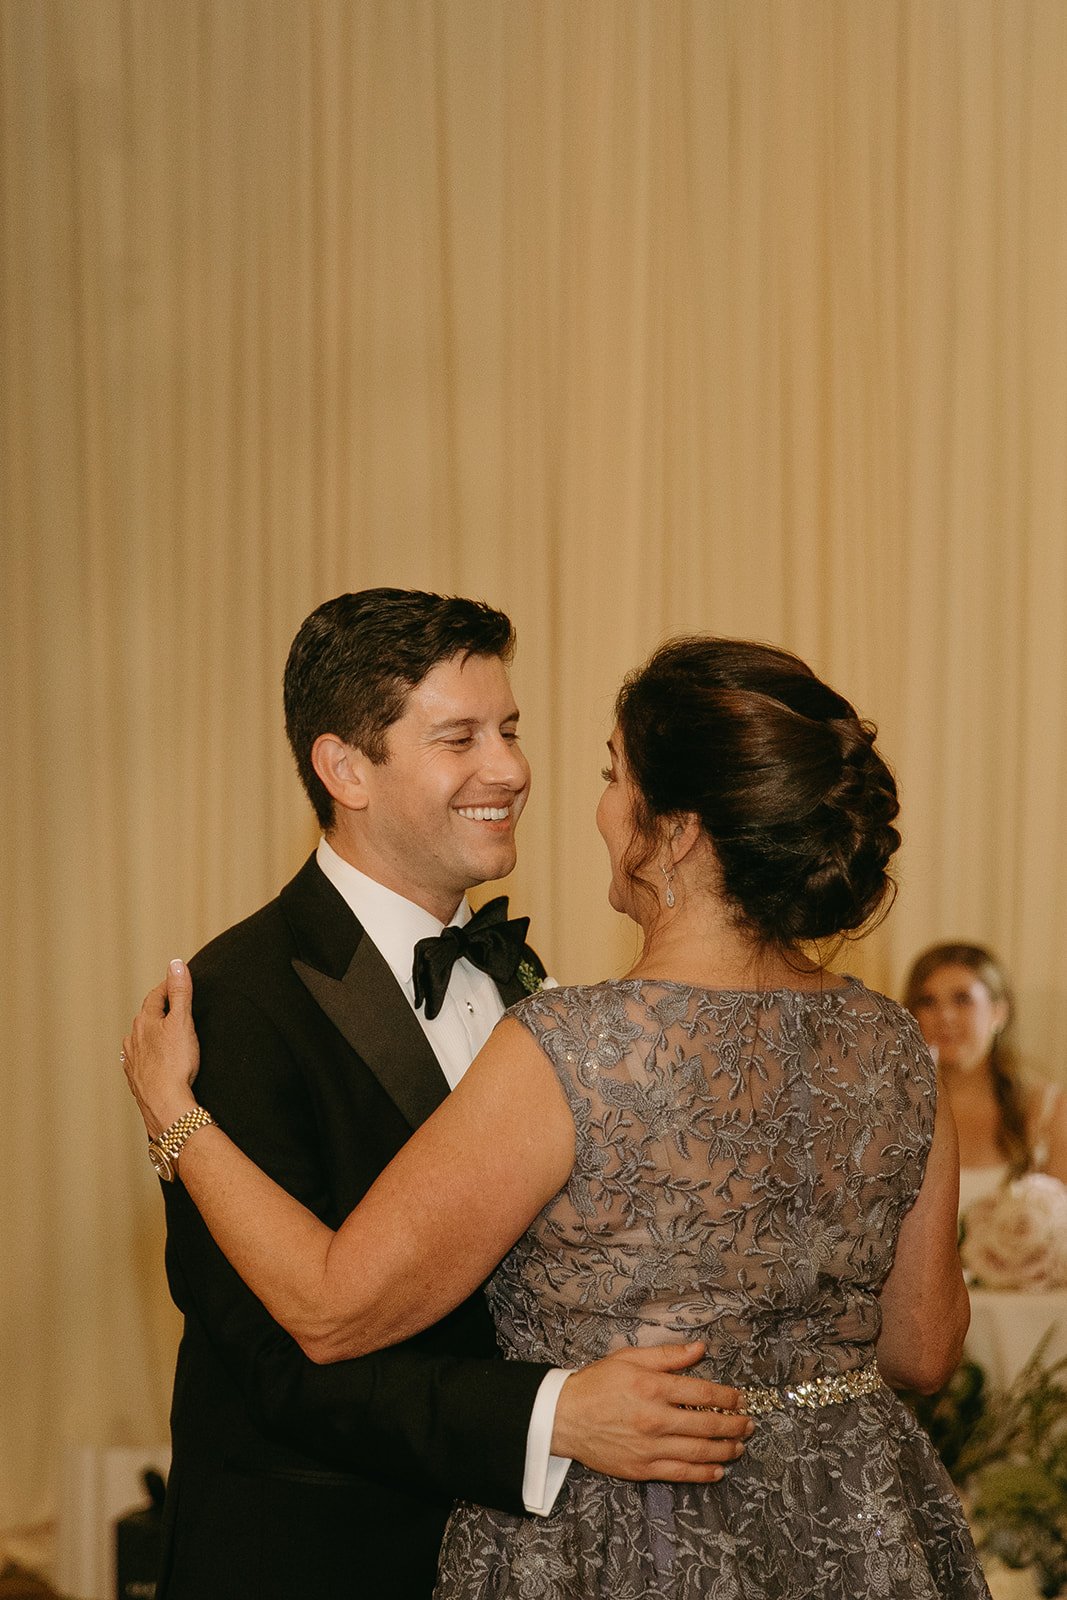 Groom dancing with his mom during wedding reception